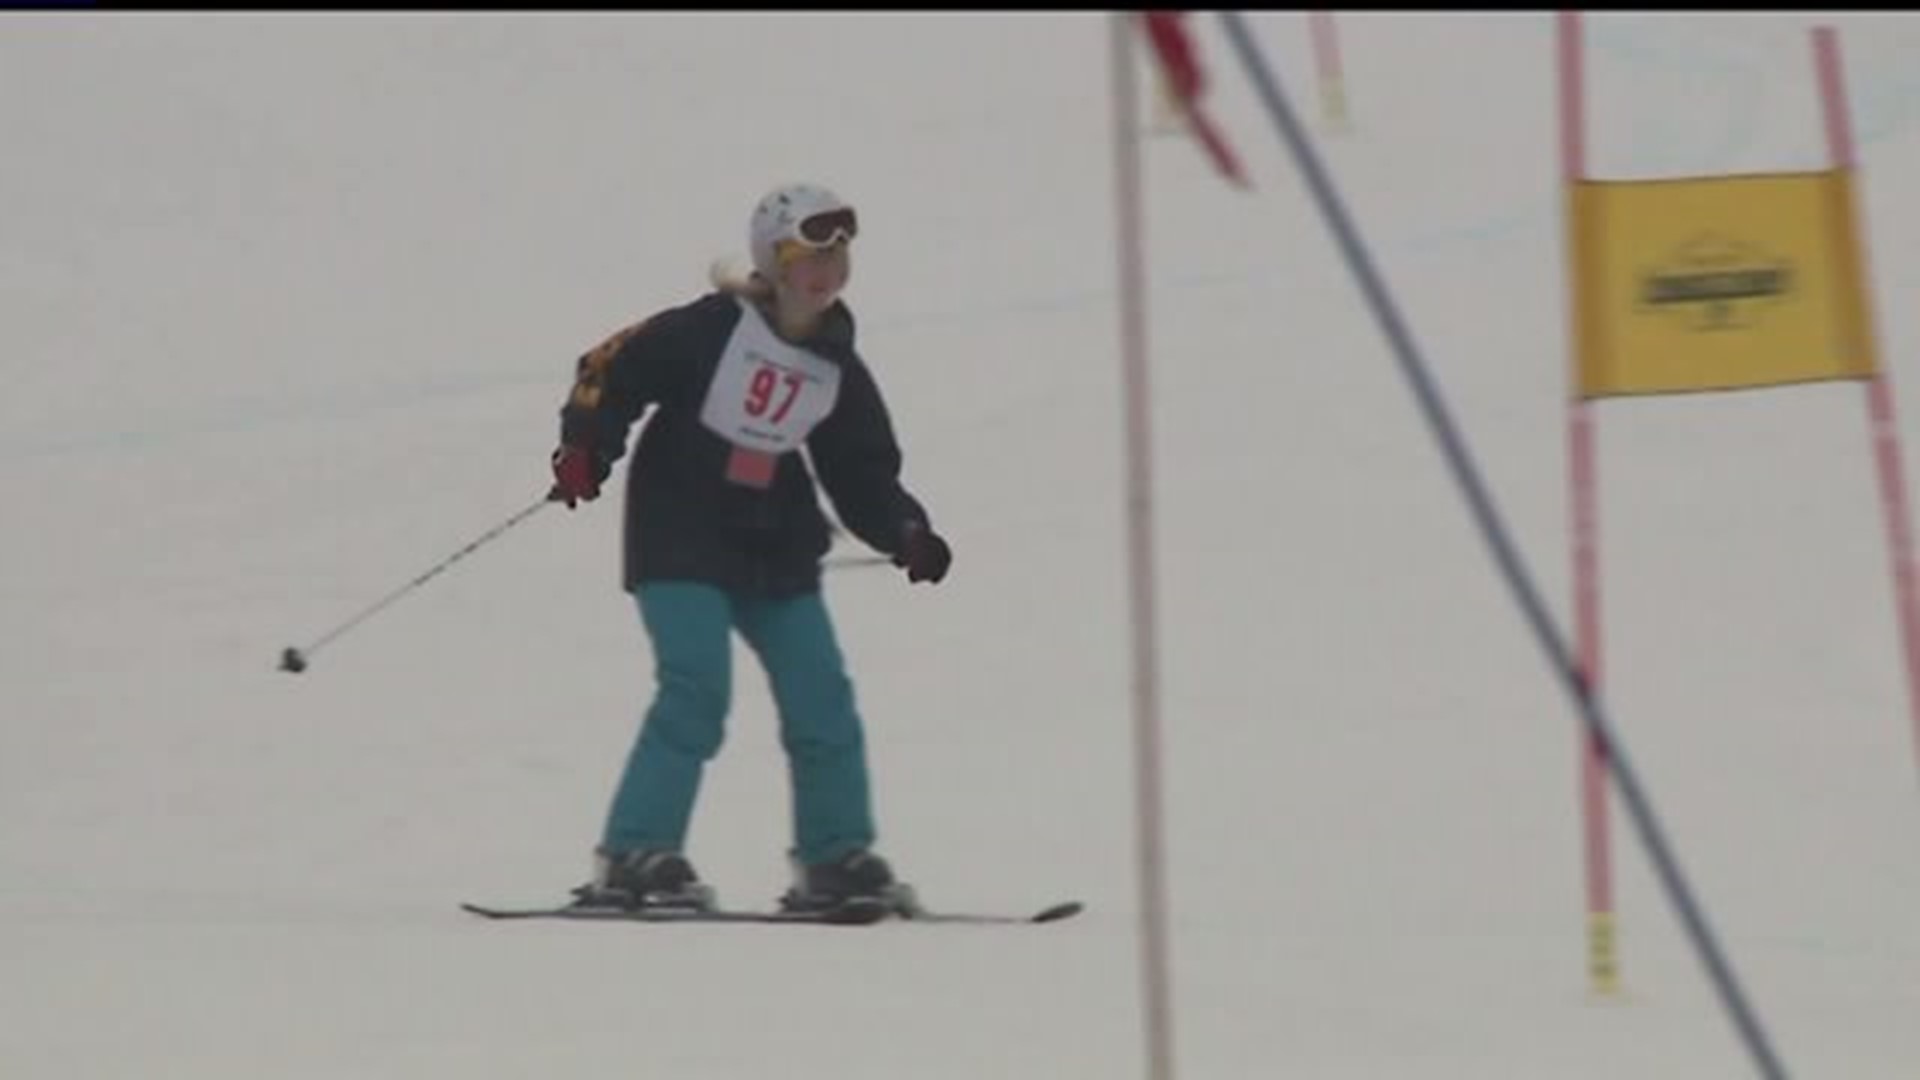 Special Olympics ski competition